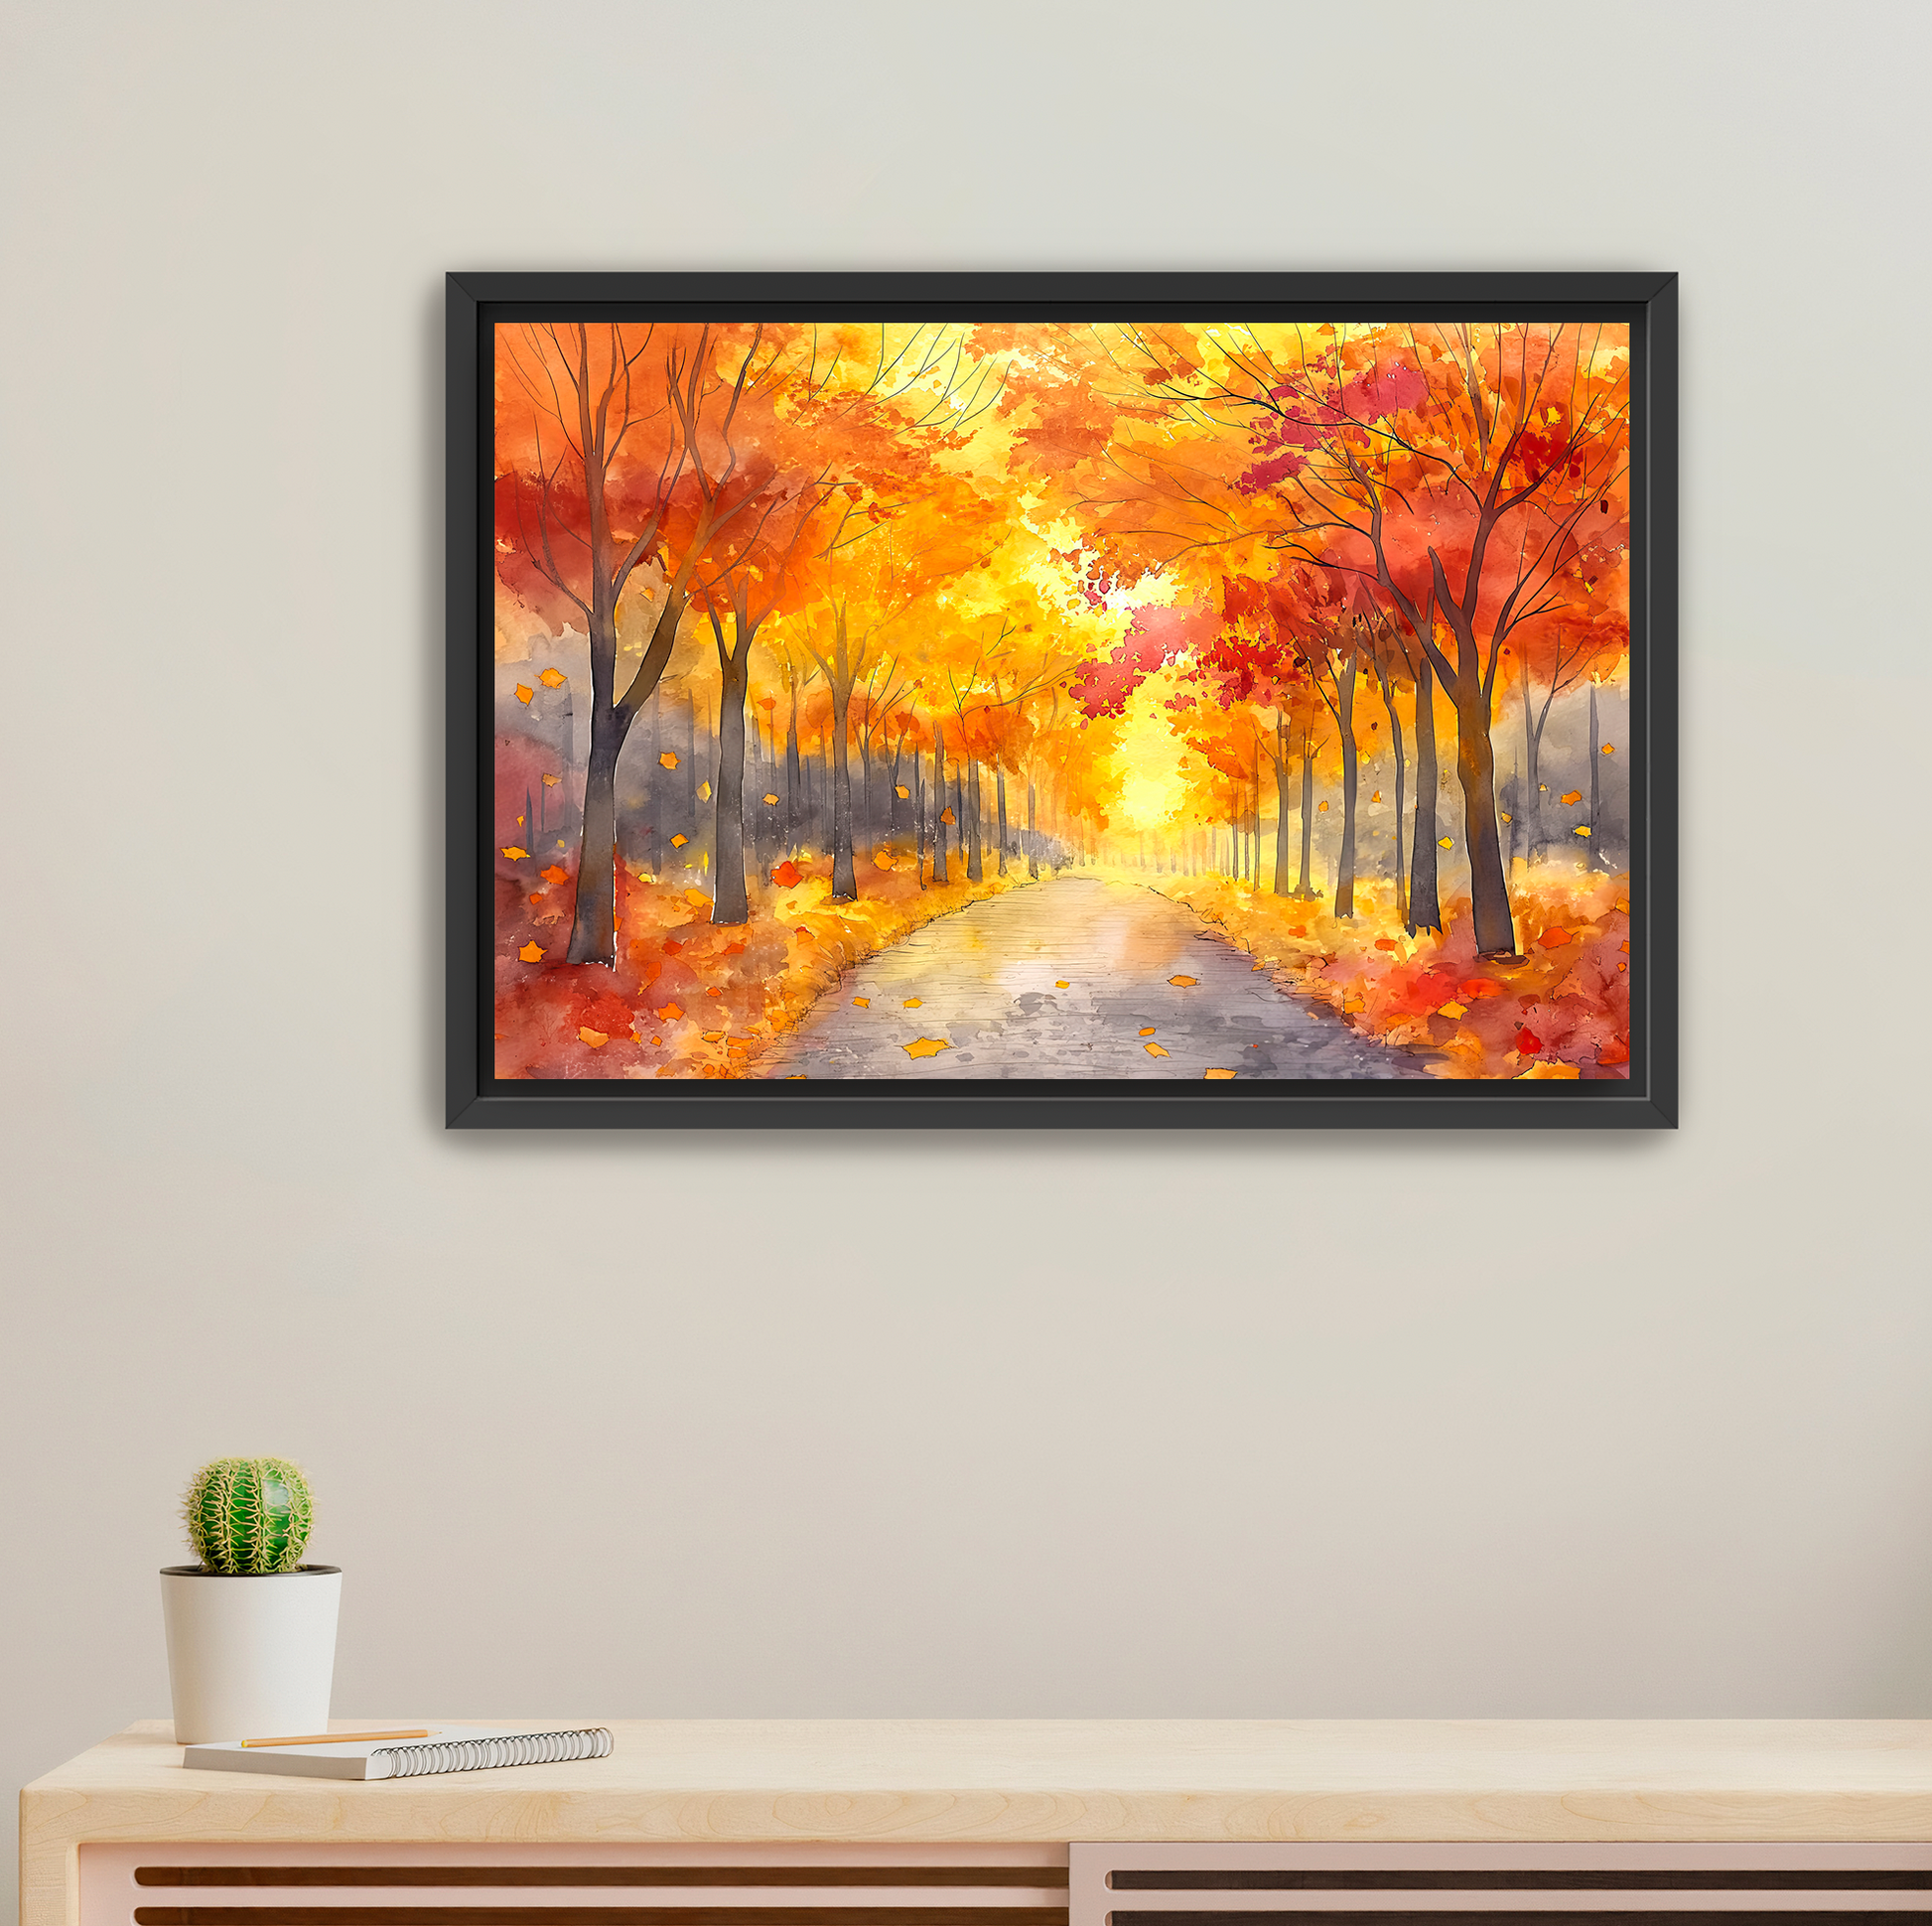 Black floating framed canvas print of autumn fall trees with a pathway. Art for sale at customconcepts.art